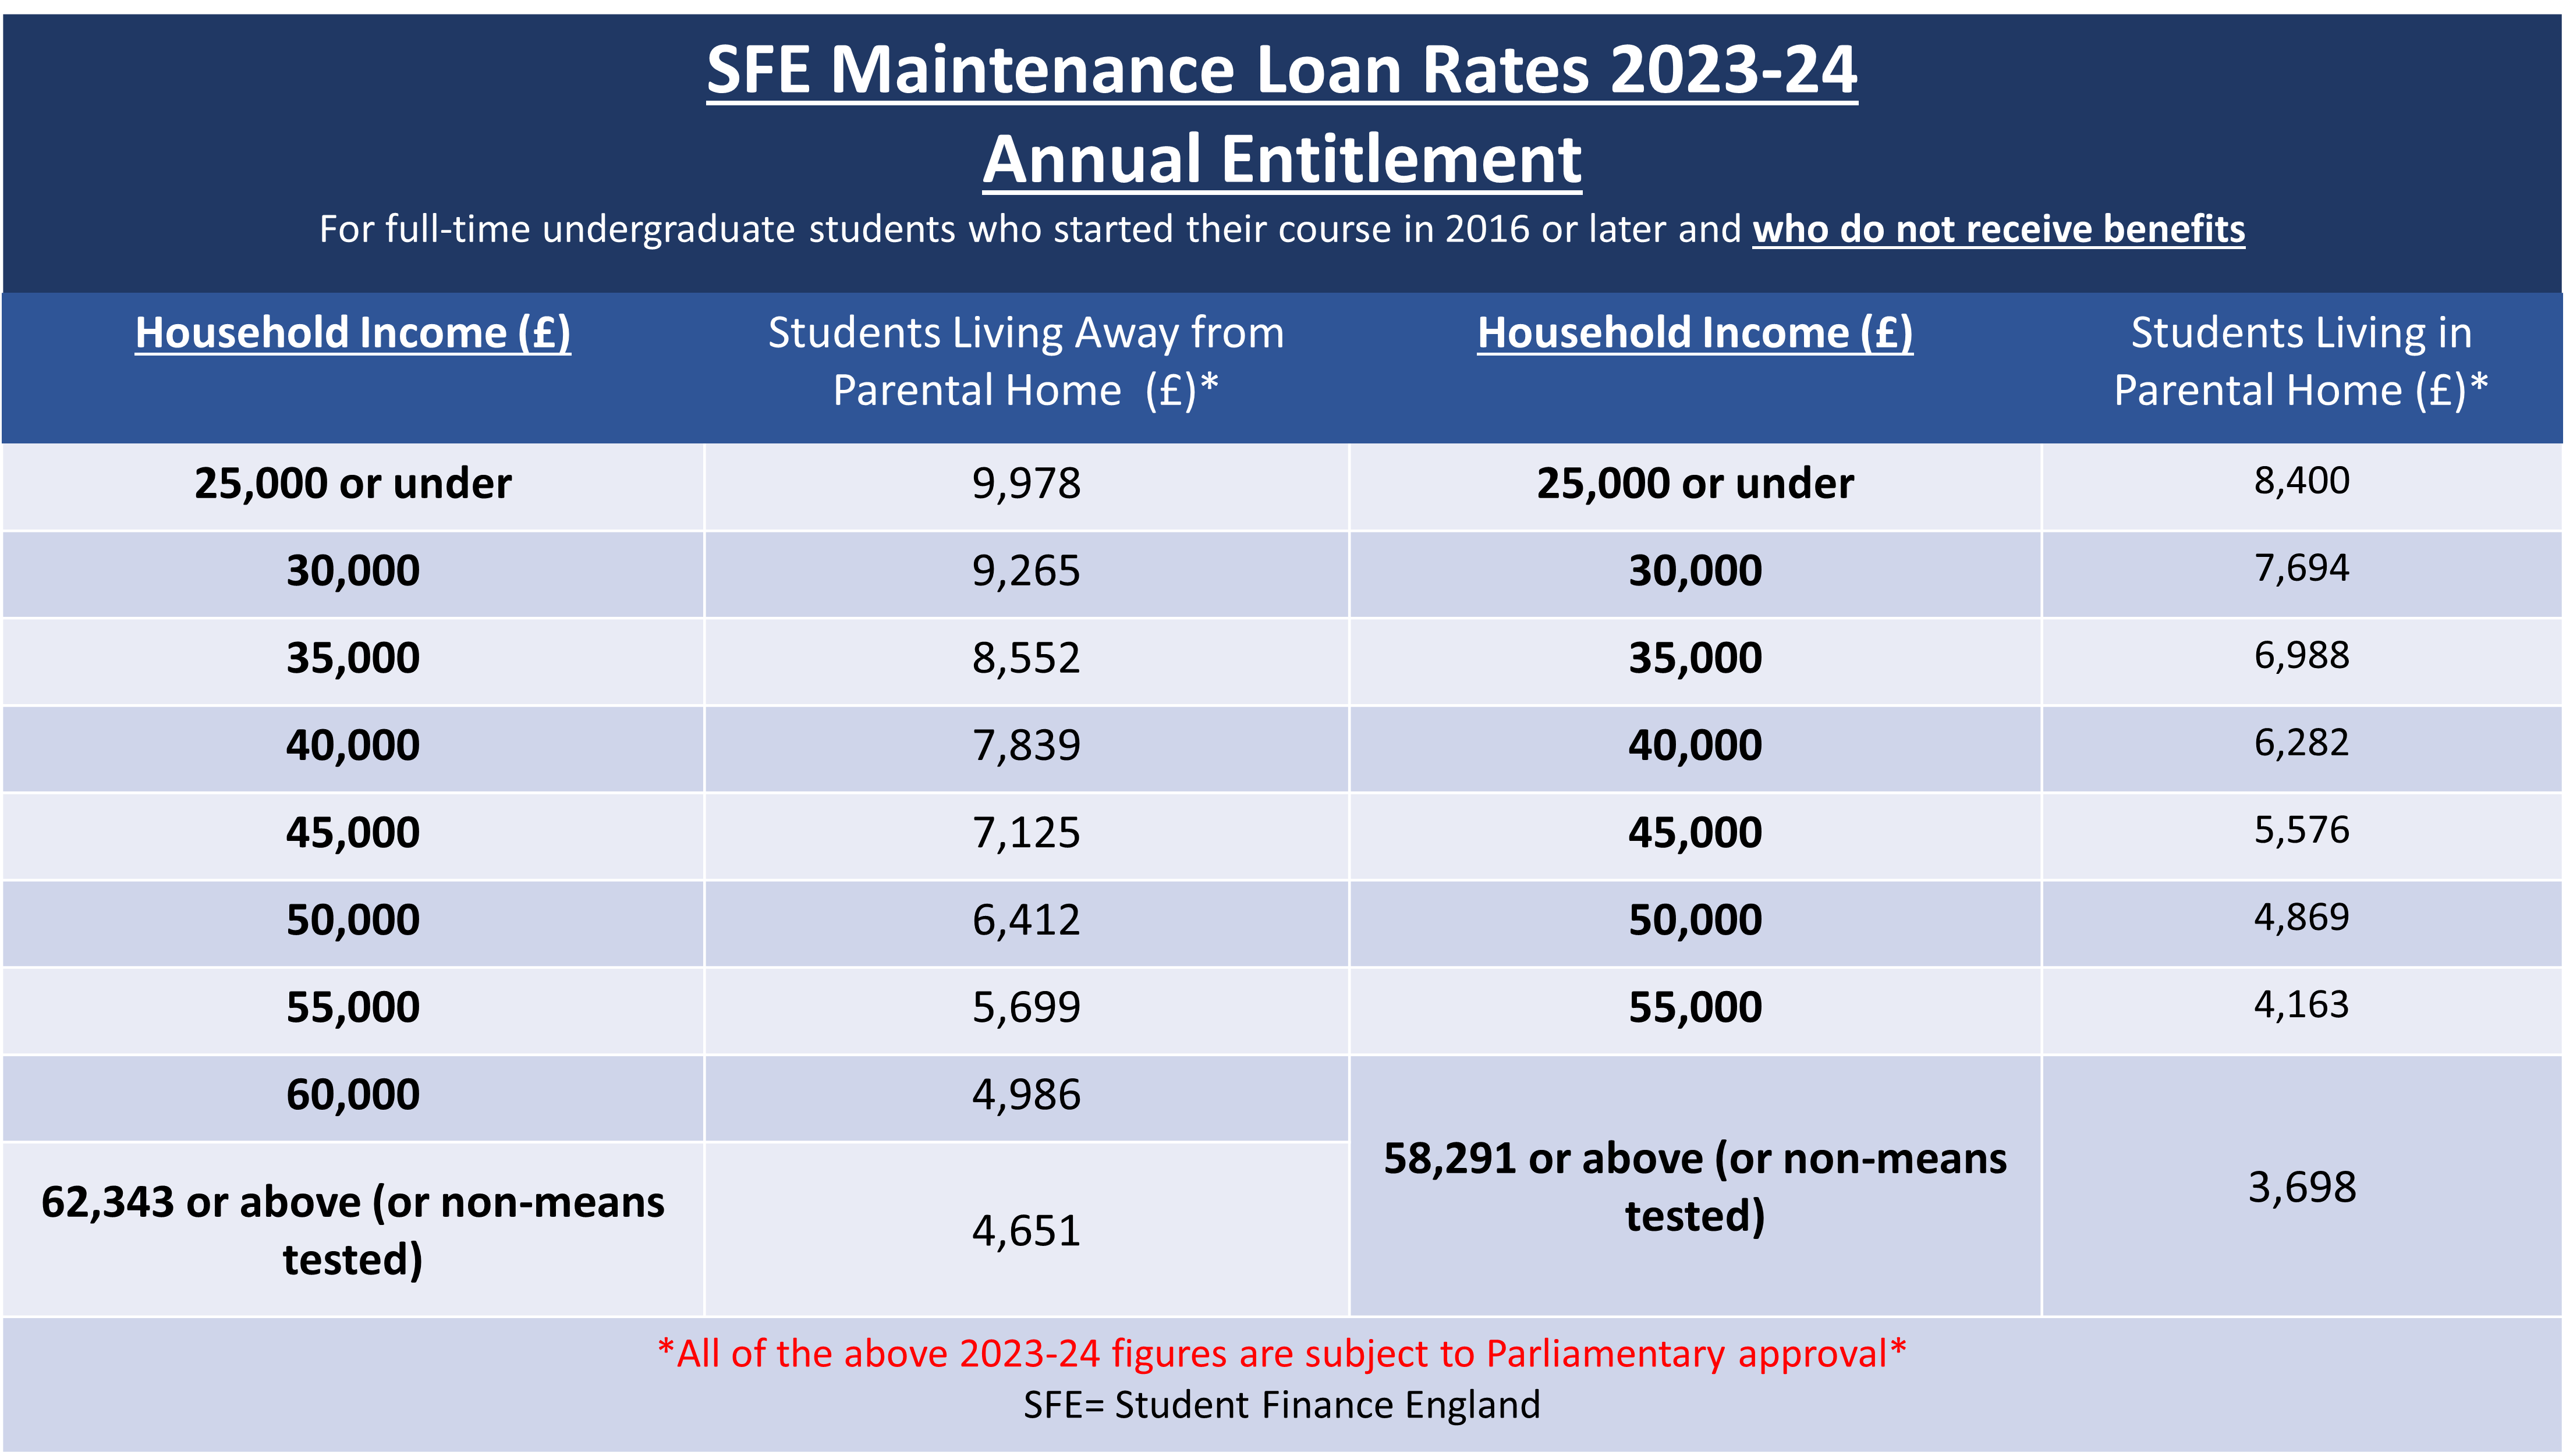 A table to show the 2023-24 maintenance loan figures for full-time undergraduates students by household income and living situation. Figures subject to parliamentary approval.